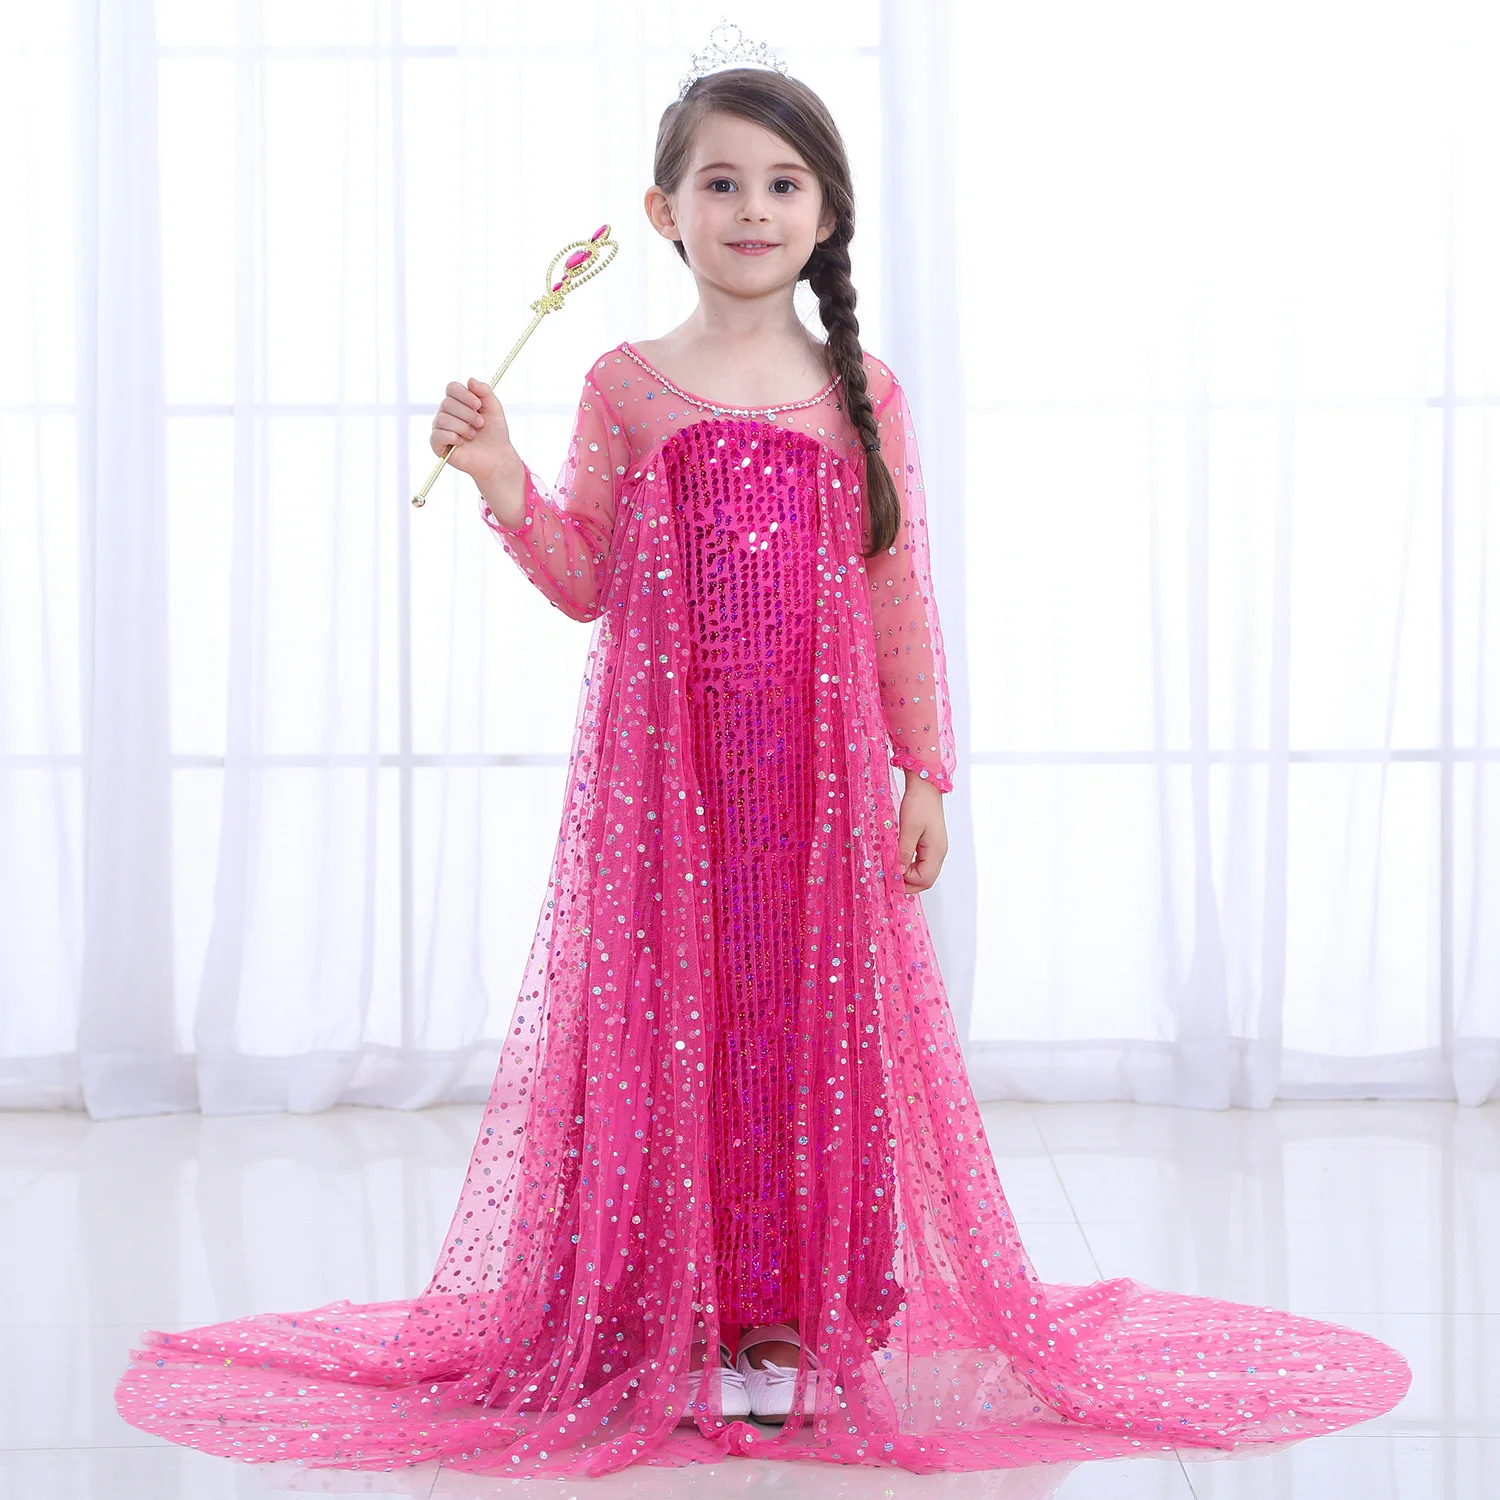 

E08 China wholesale Hot Sale Elsa Queen Costume Sequin Kids Masquerade Party Dress for Frozen Girls, Blue, hotpink